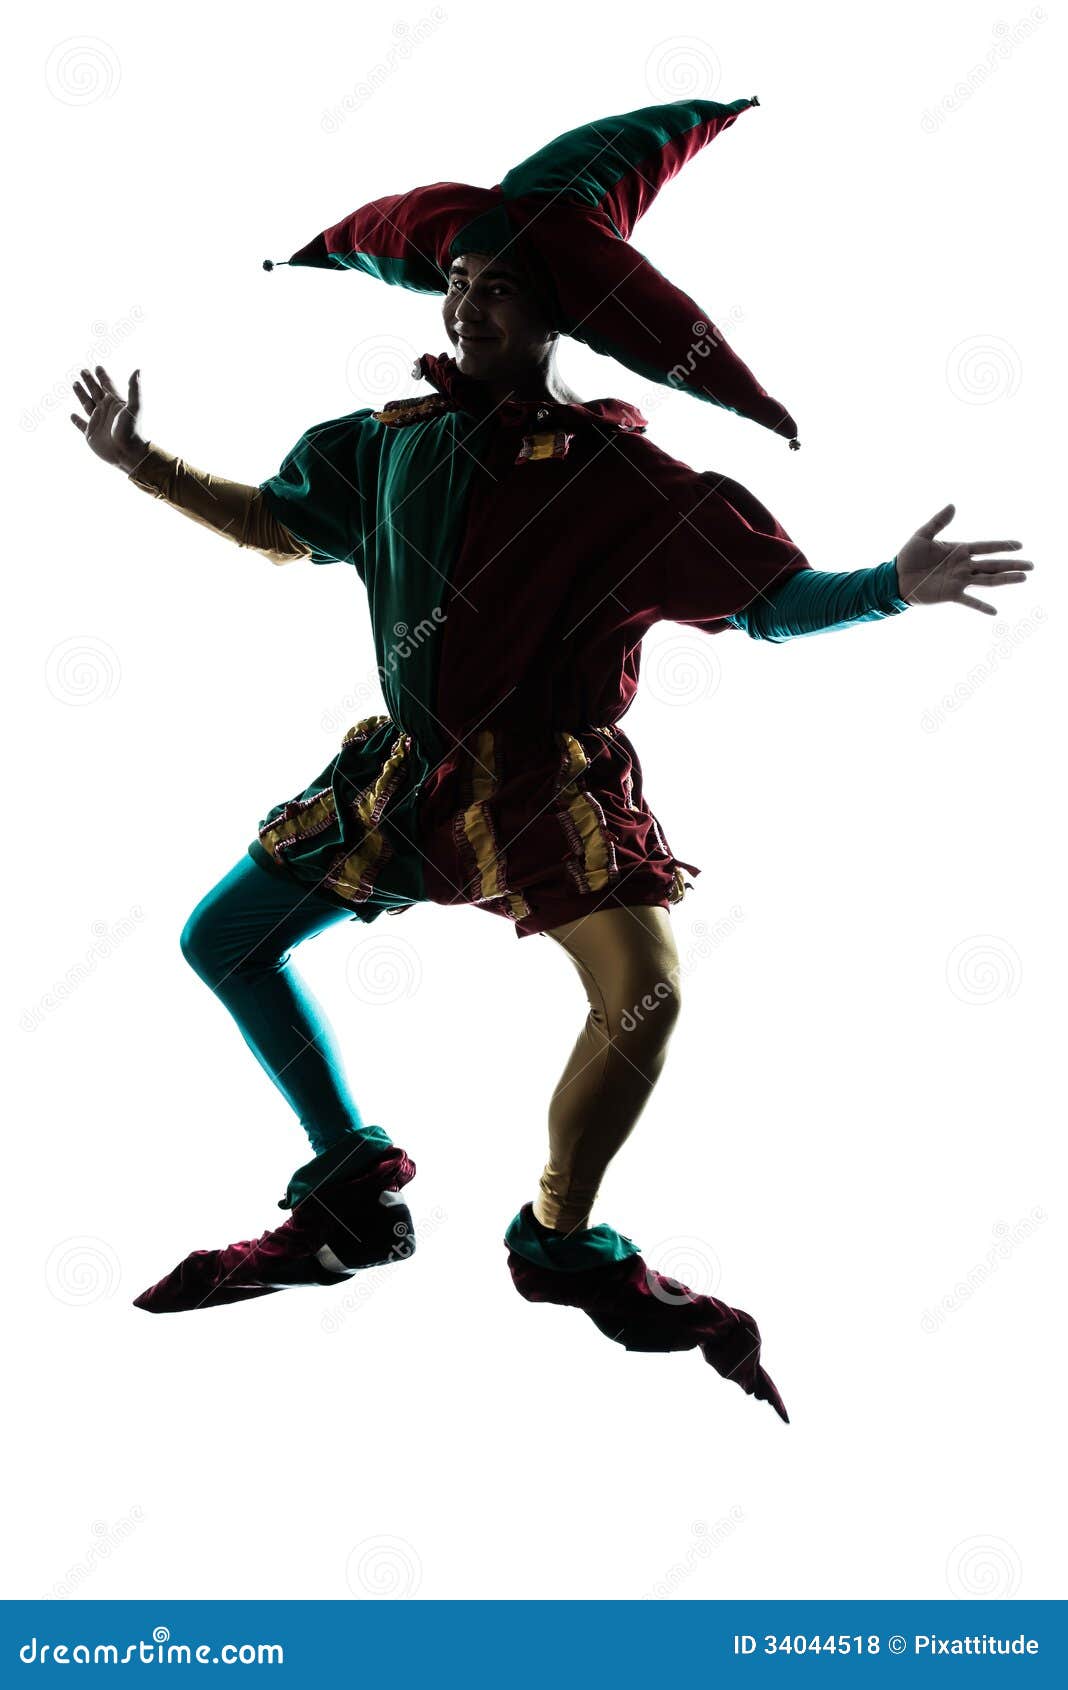 Man in Jester Costume Silhouette Jumping Stock Photo - Image of joker ...